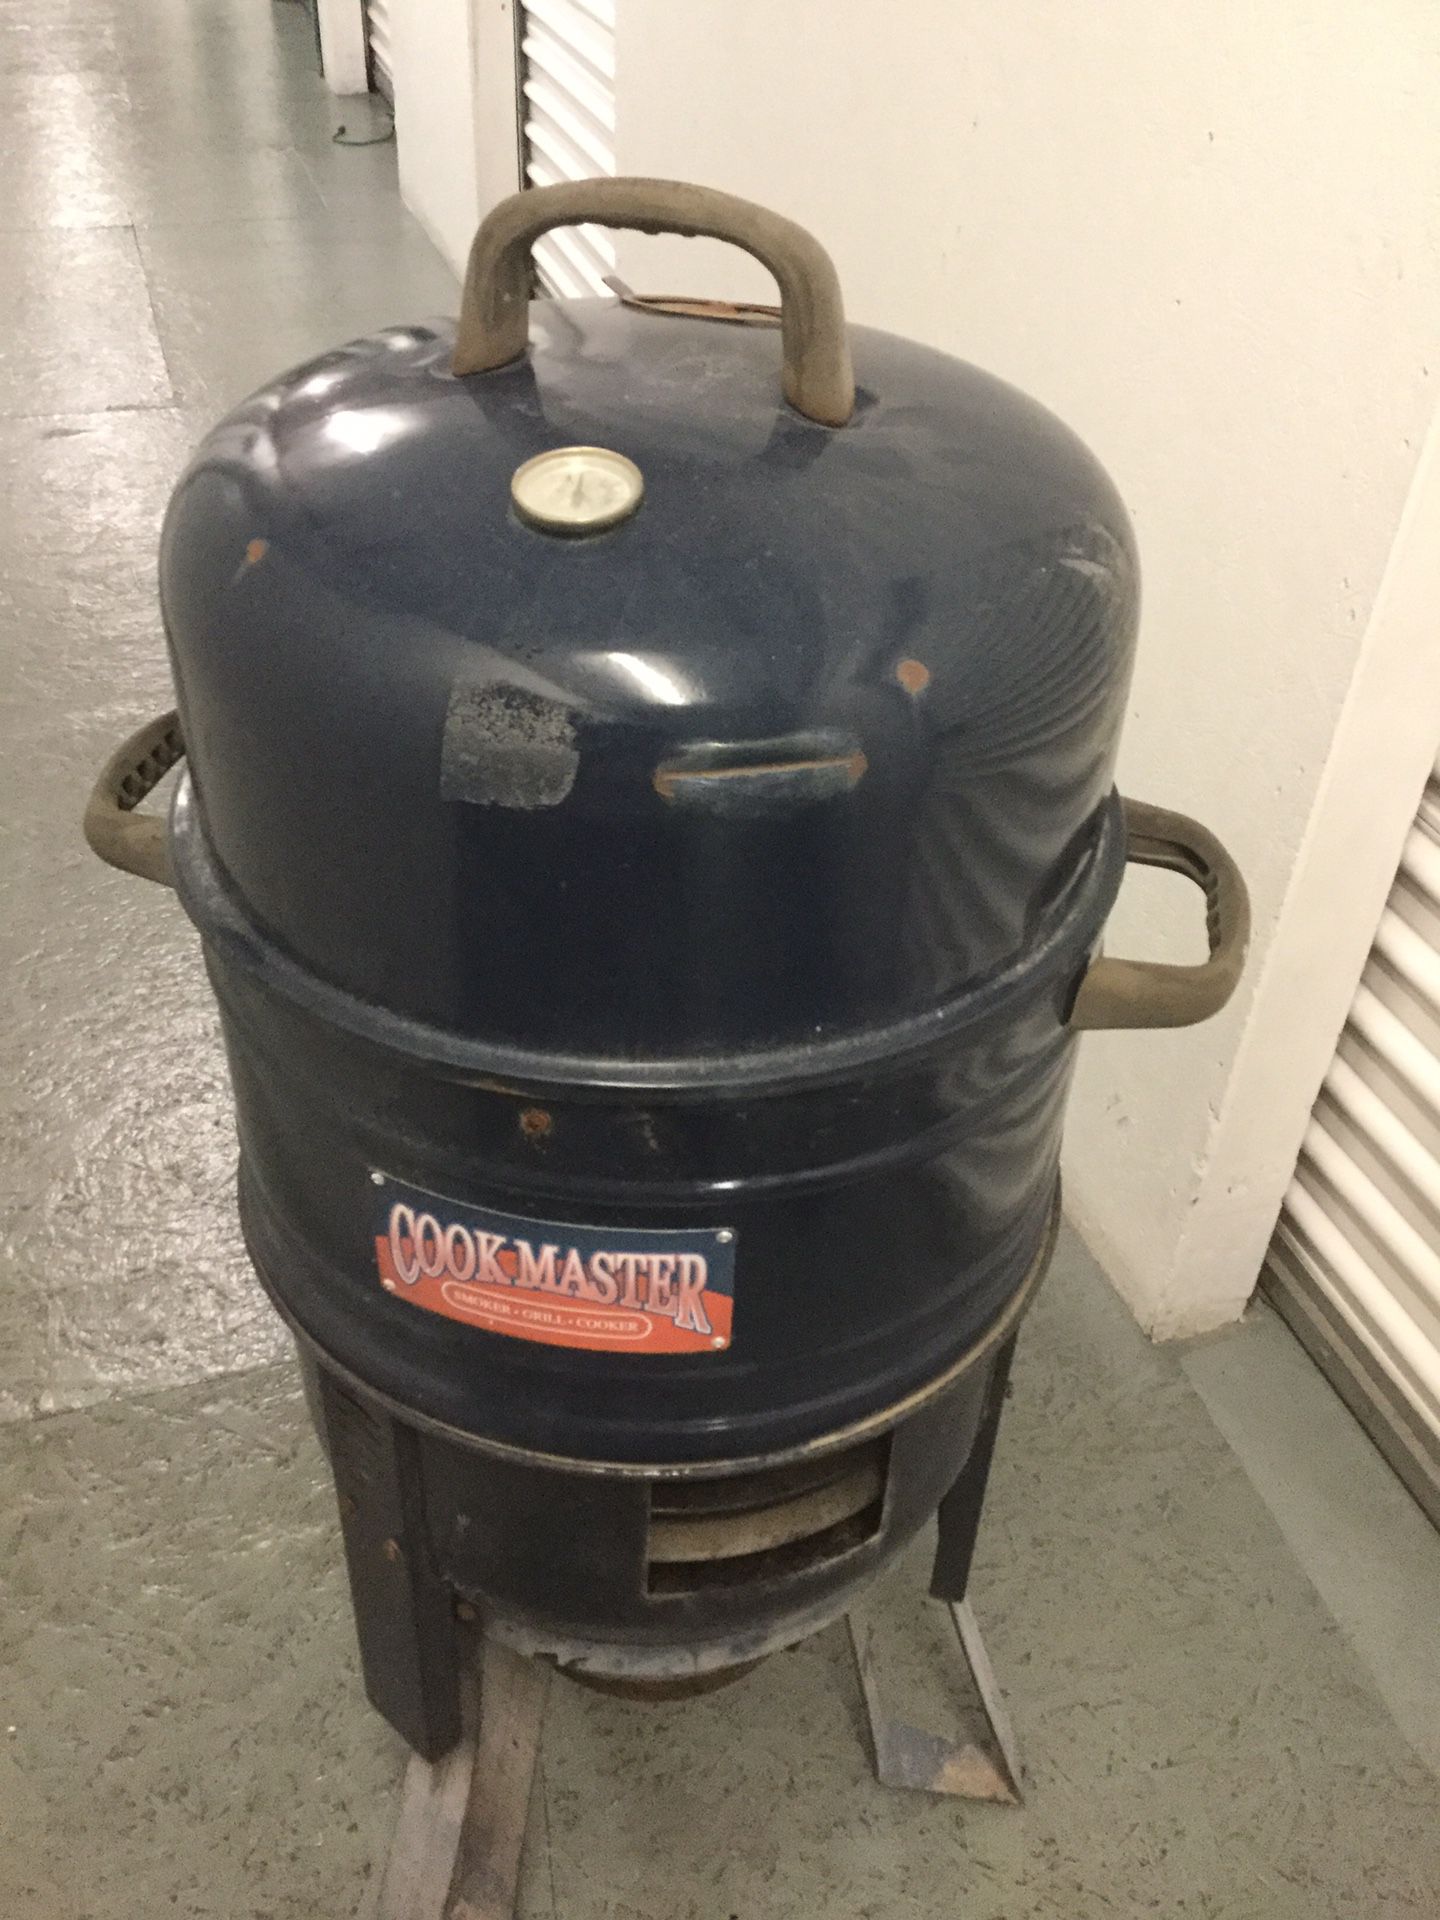 Cook master grill/smoker